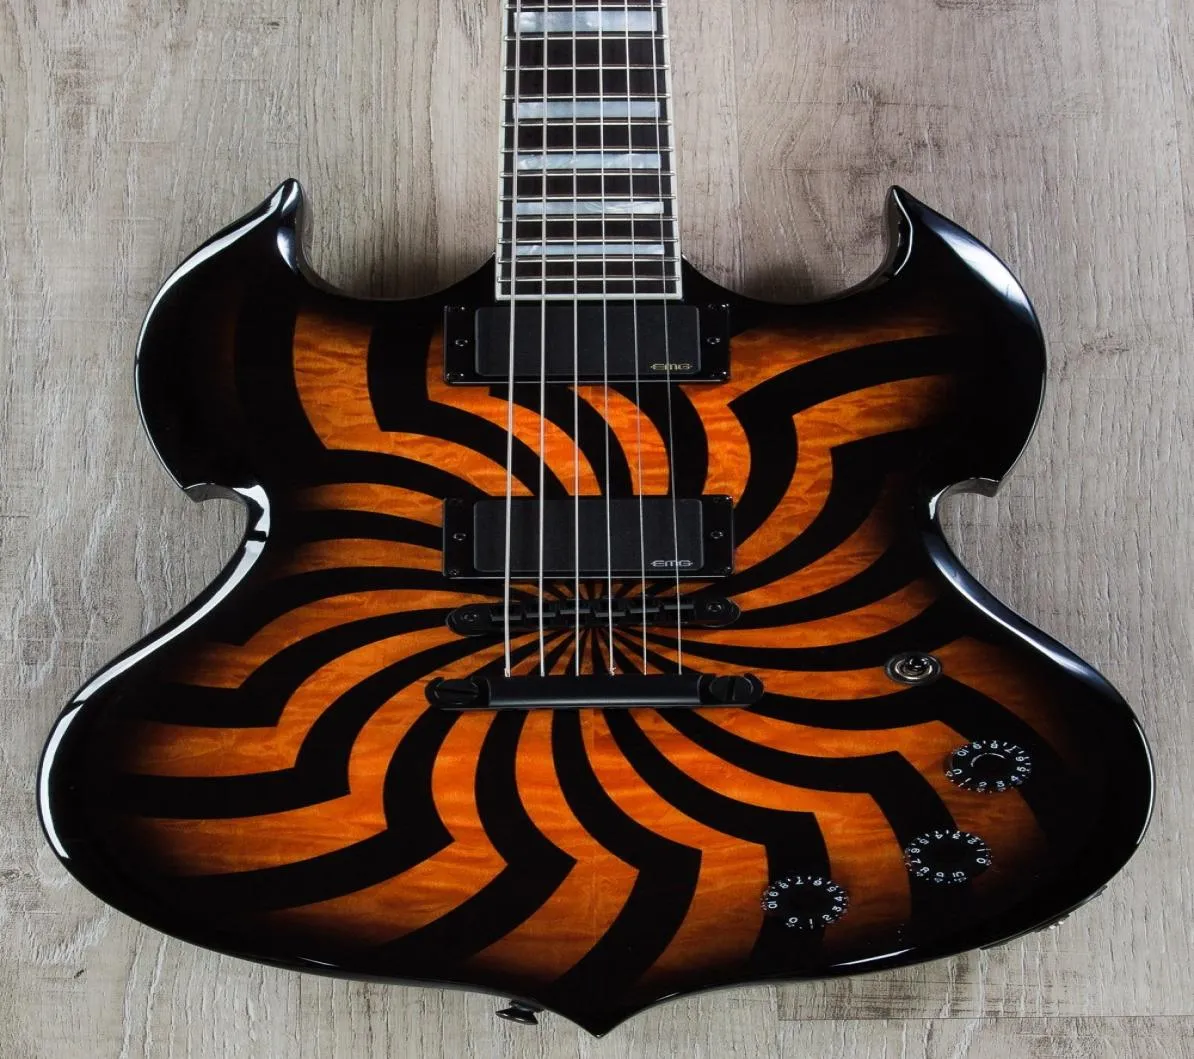 Wylde Audio Barbarian Hellfire Black Buzzsaw Orange Quilted Maple Top Sg Electric Guitar Guitar Large Block Unlay 3 Stape Knobs Black H8693317